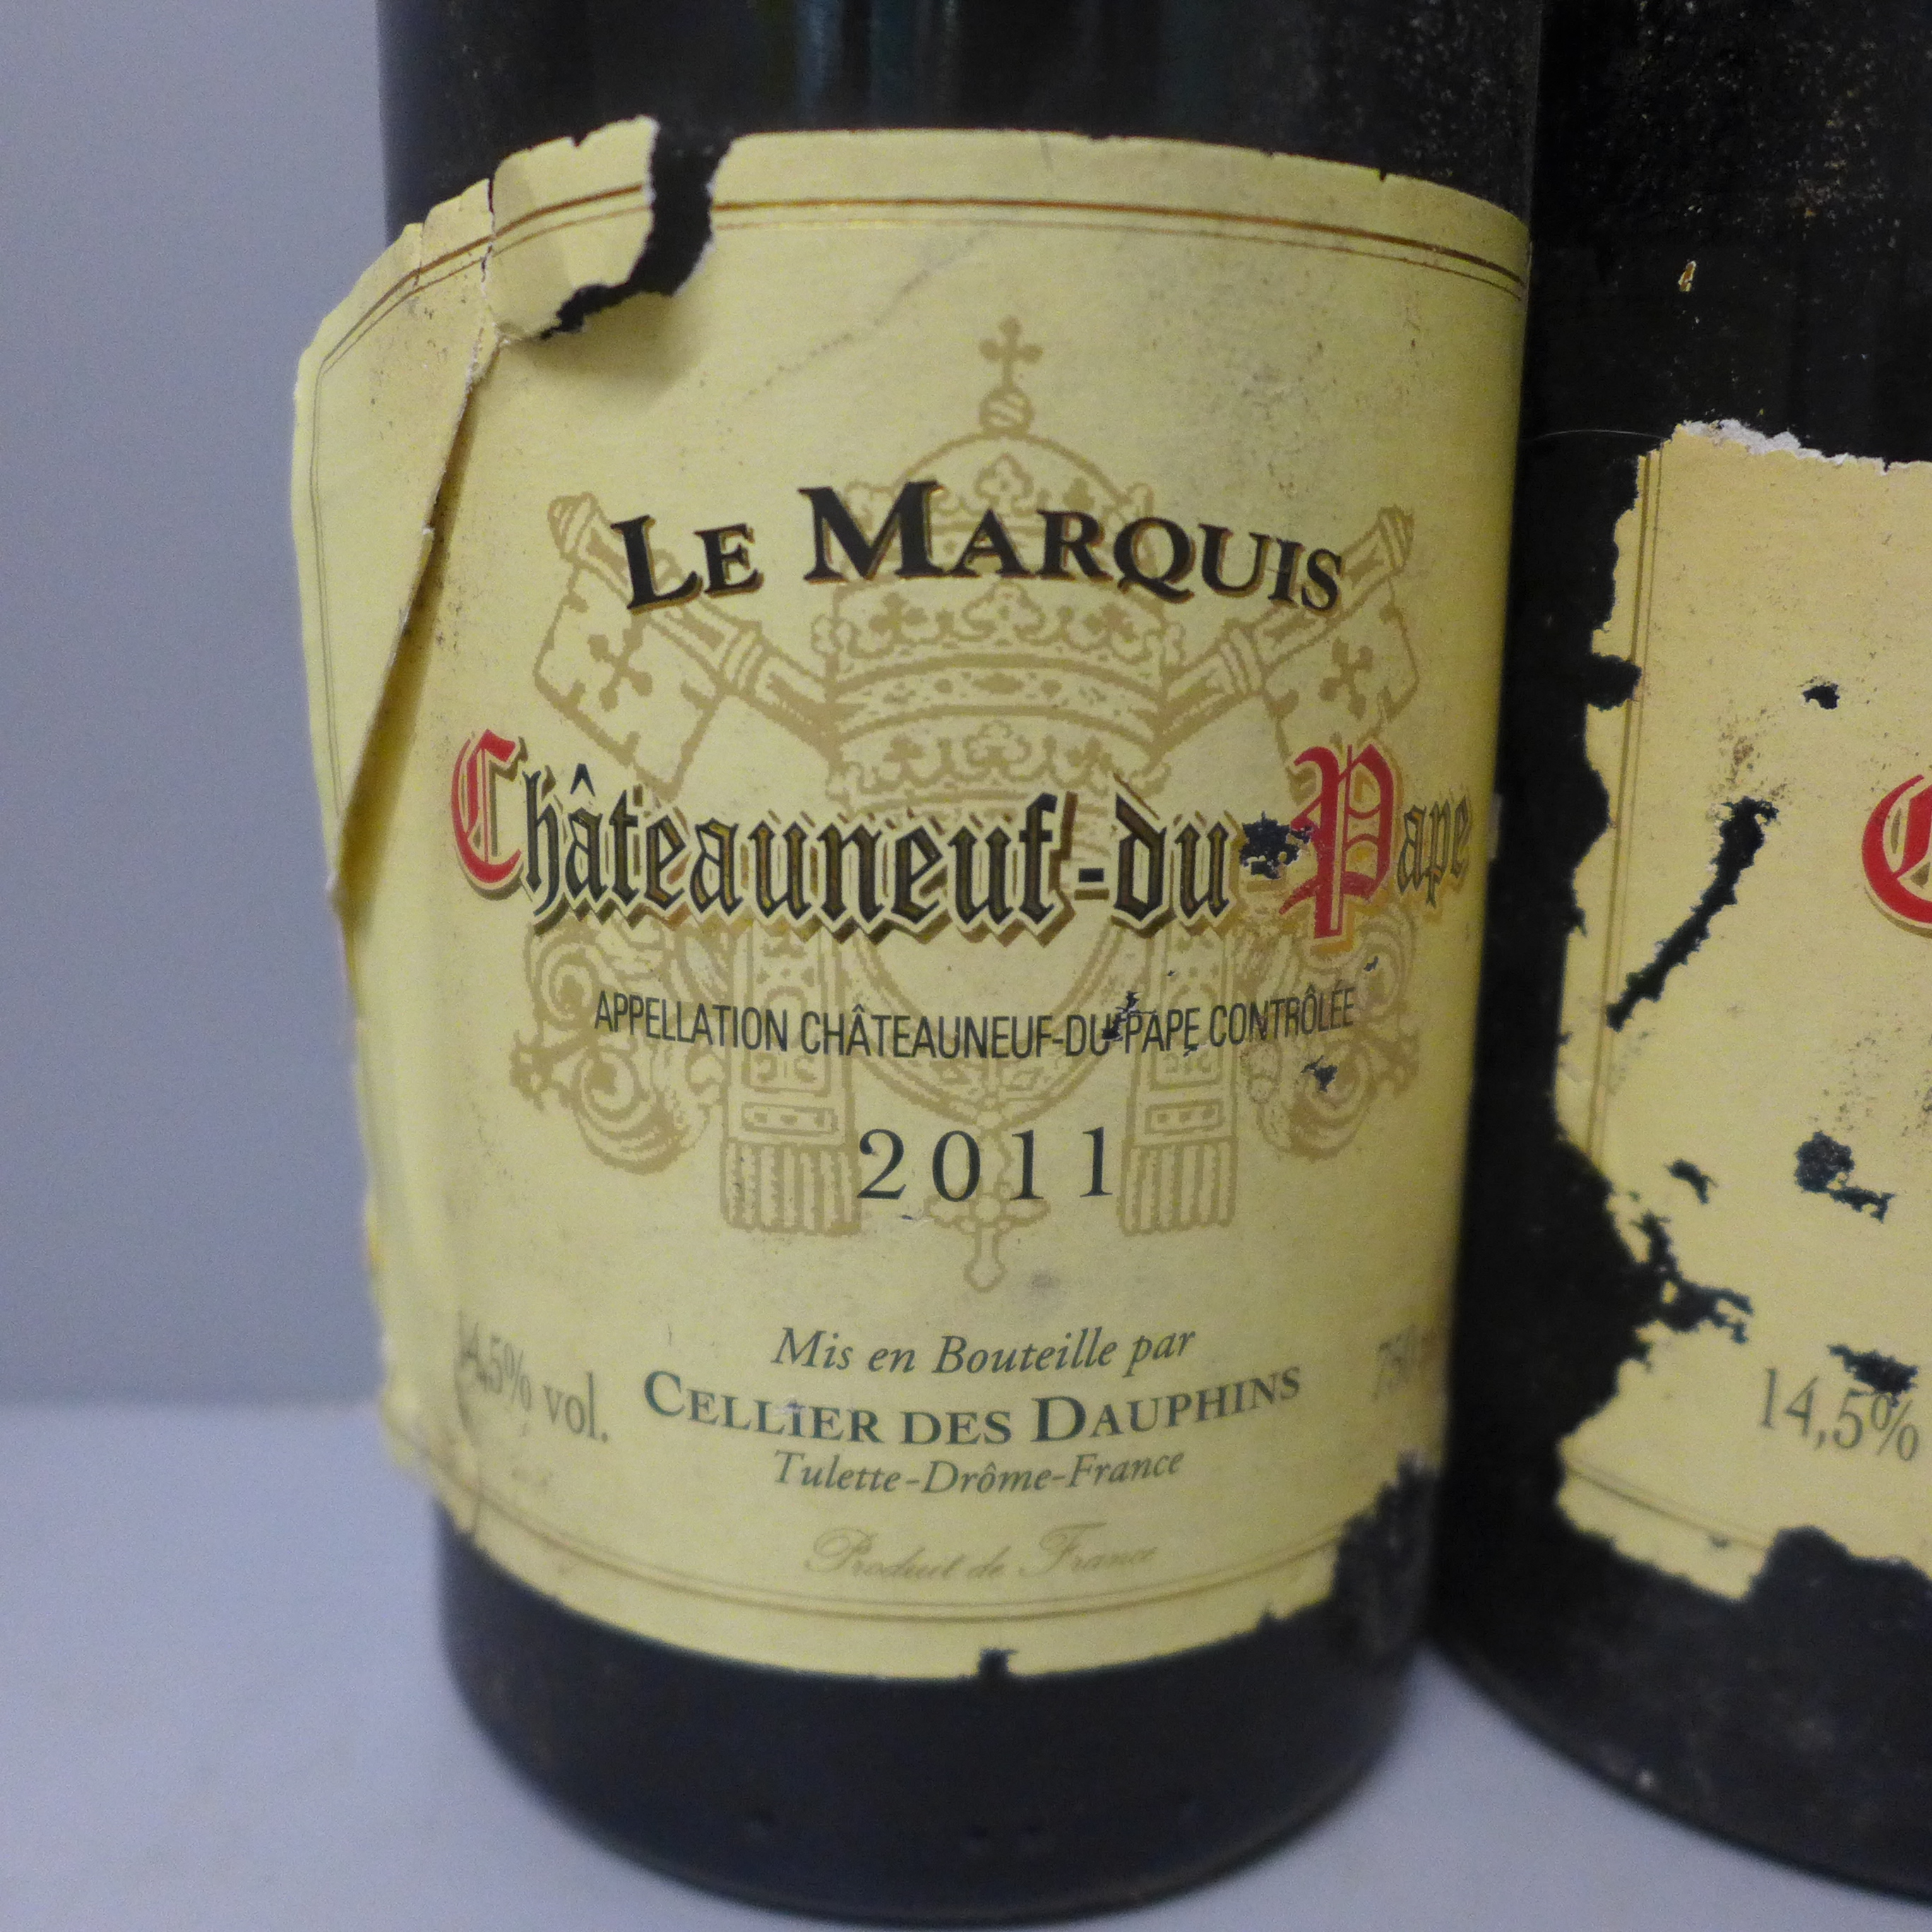 Three bottles of 2011 Chateauneuf du Pape Cellier des Dauphins **PLEASE NOTE THIS LOT IS NOT - Image 2 of 2